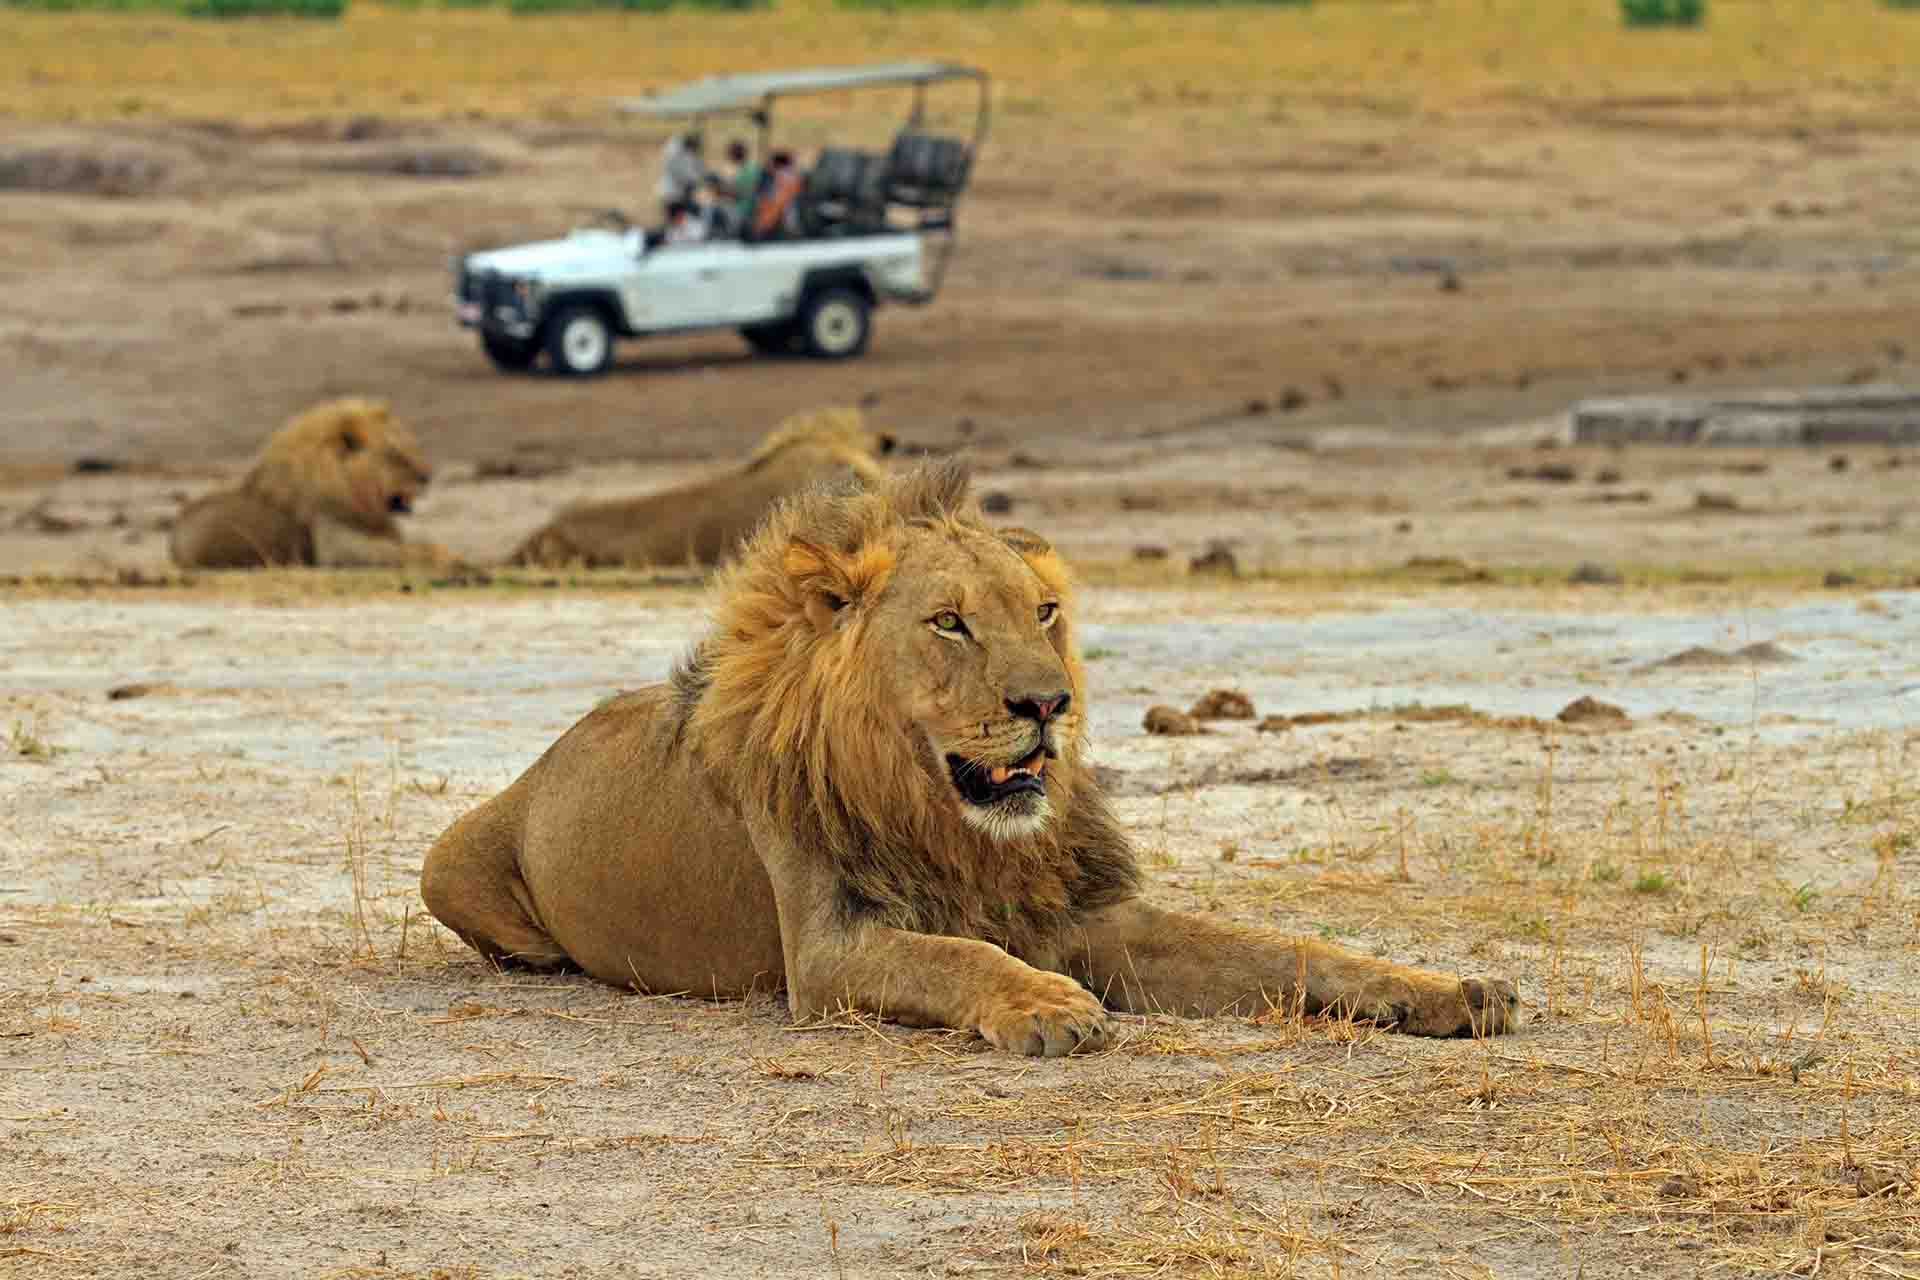 Male Lion resting on the African plains with a safari game vehicle and another lion in the distance